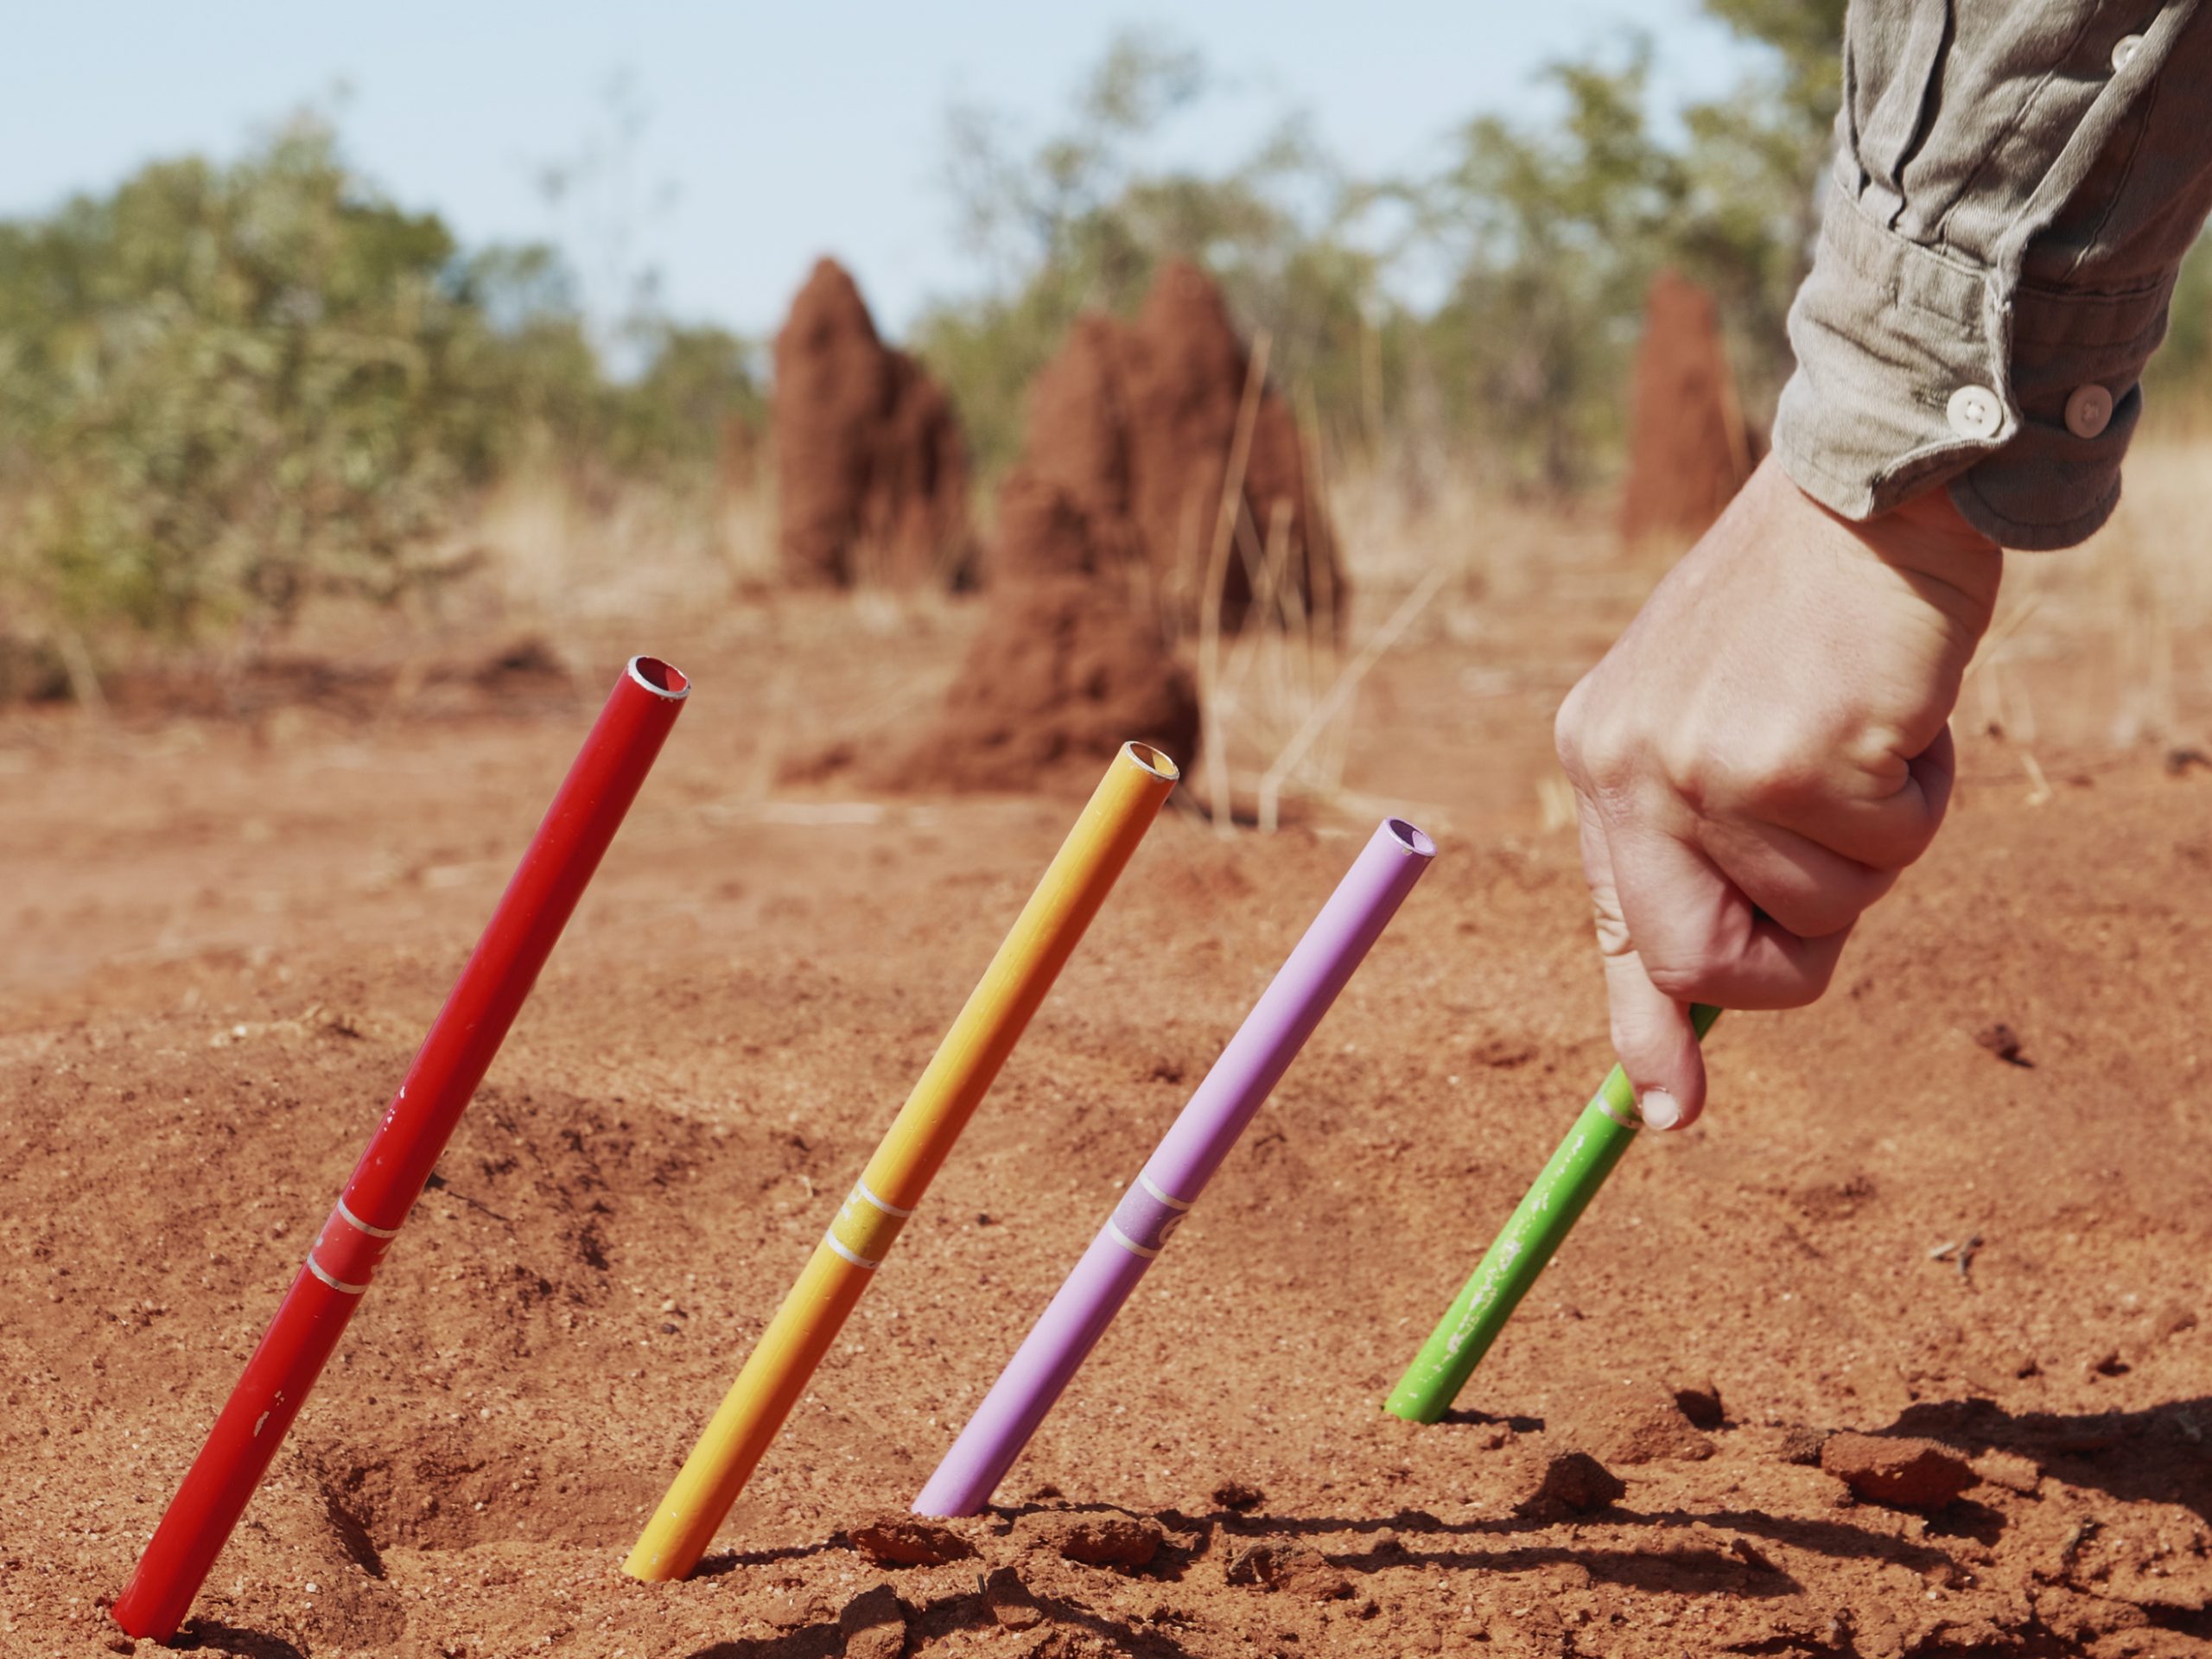 a white hand inserts a measurement tool into red earth. The tools are red, yellow, lilac and green.